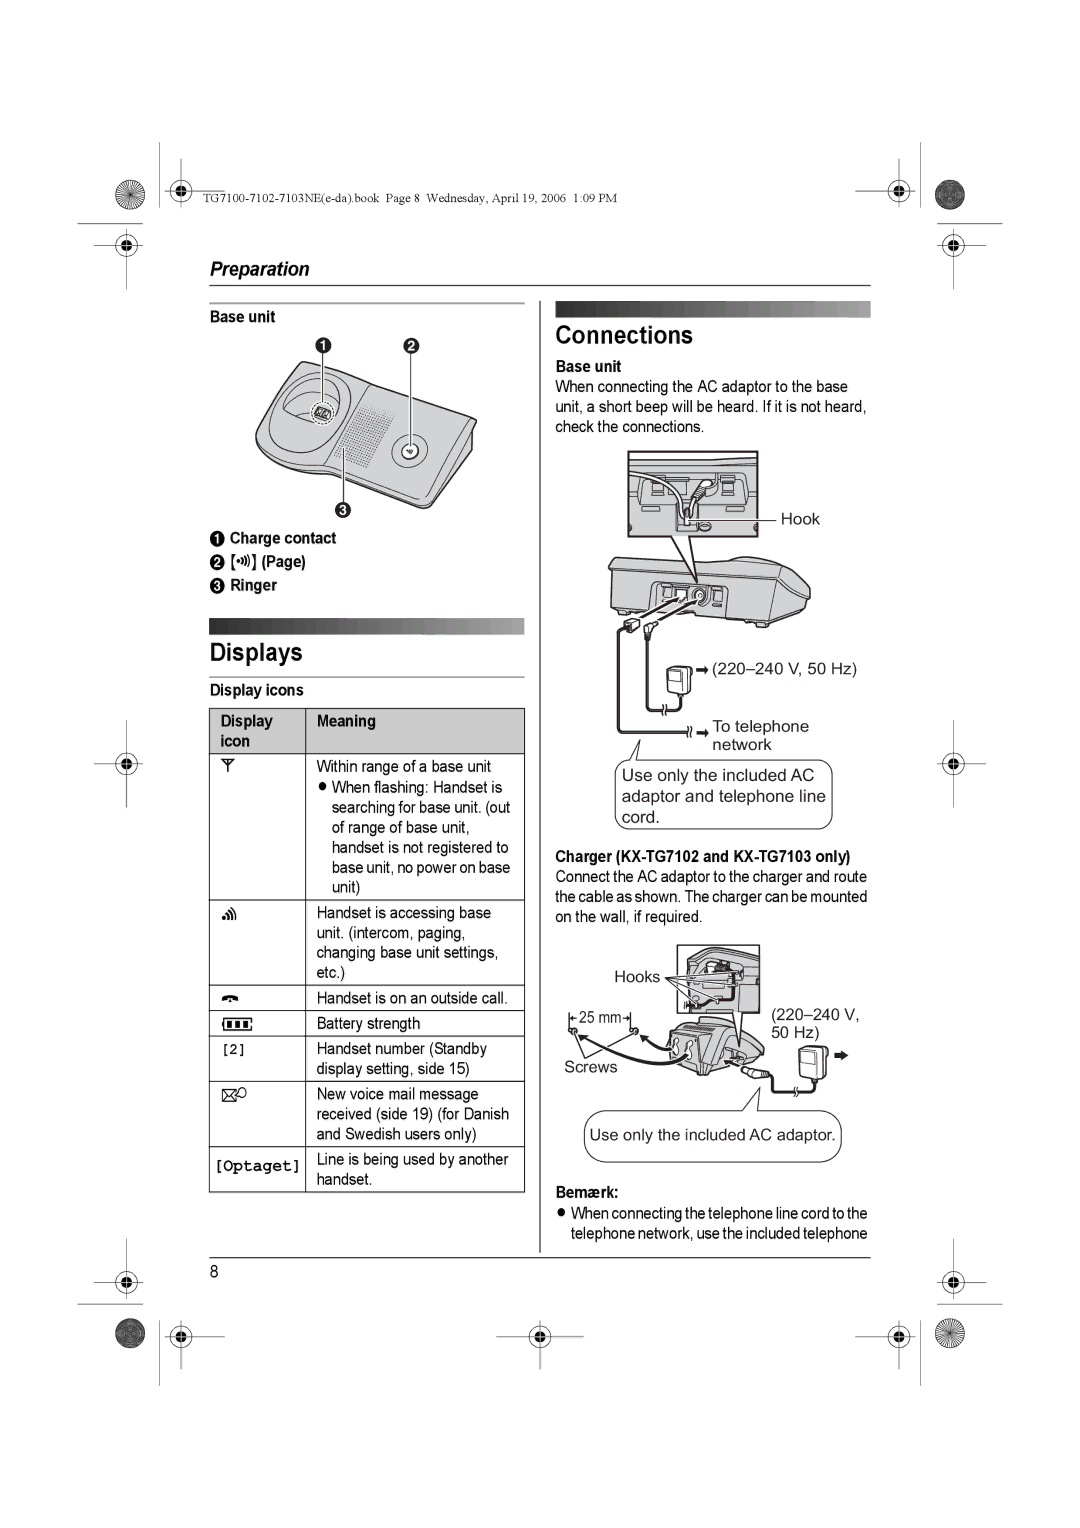 Panasonic KX-TG7103NE Displays, Connections, Base unit Charge contact Ringer, Display icons Display Meaning icon 